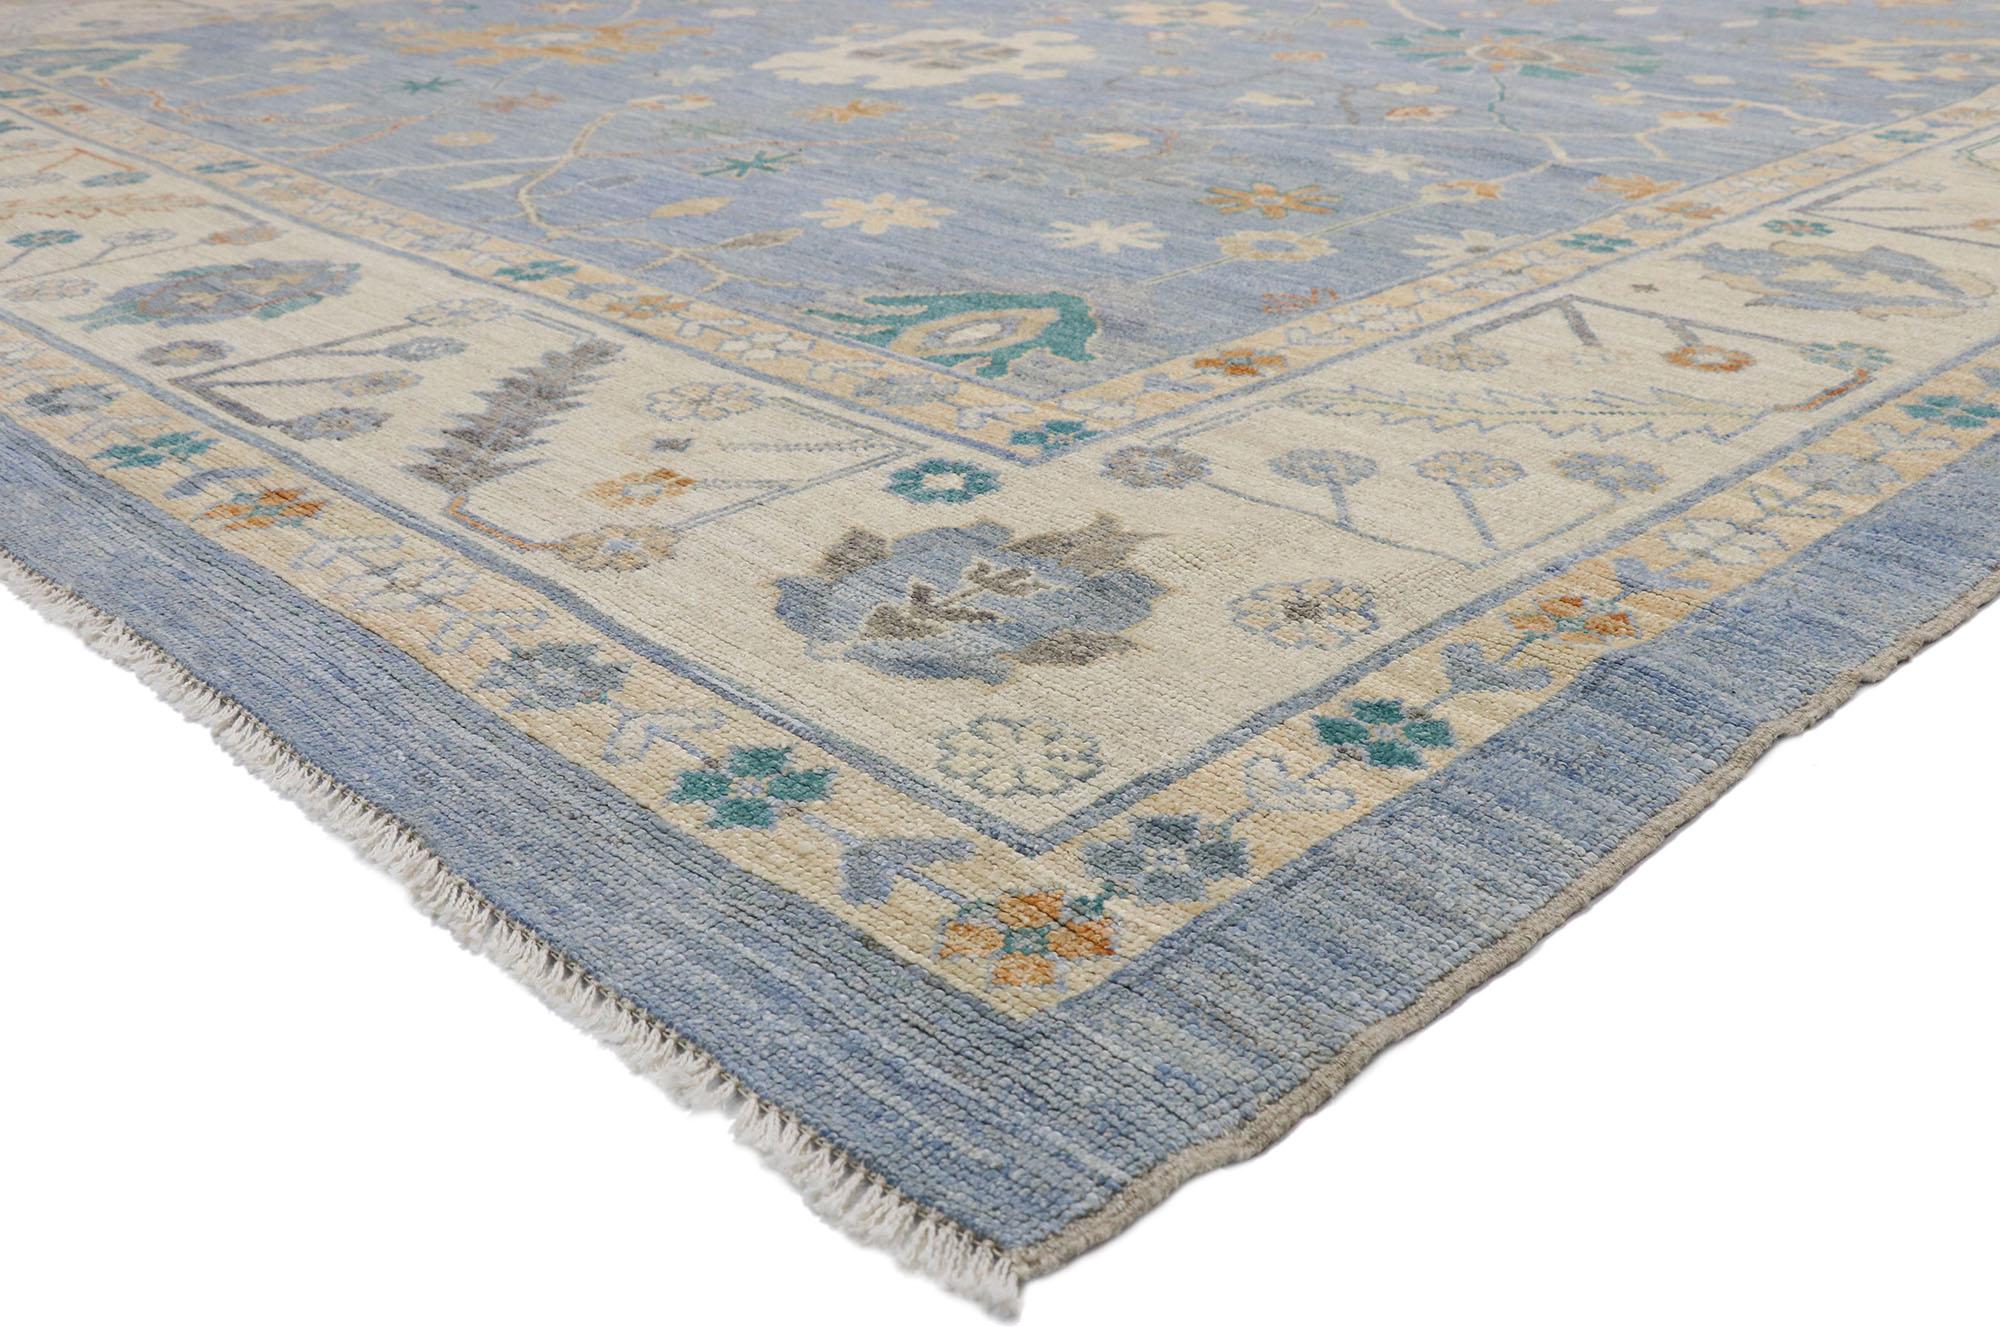 80555 New Colorful Blue Oushak Rug, 11'10 x 15'02. Blending elements from the modern world with light and airy colors, this hand-knotted wool contemporary Oushak style area rug will boost the coziness factor in nearly any space. The geometric print